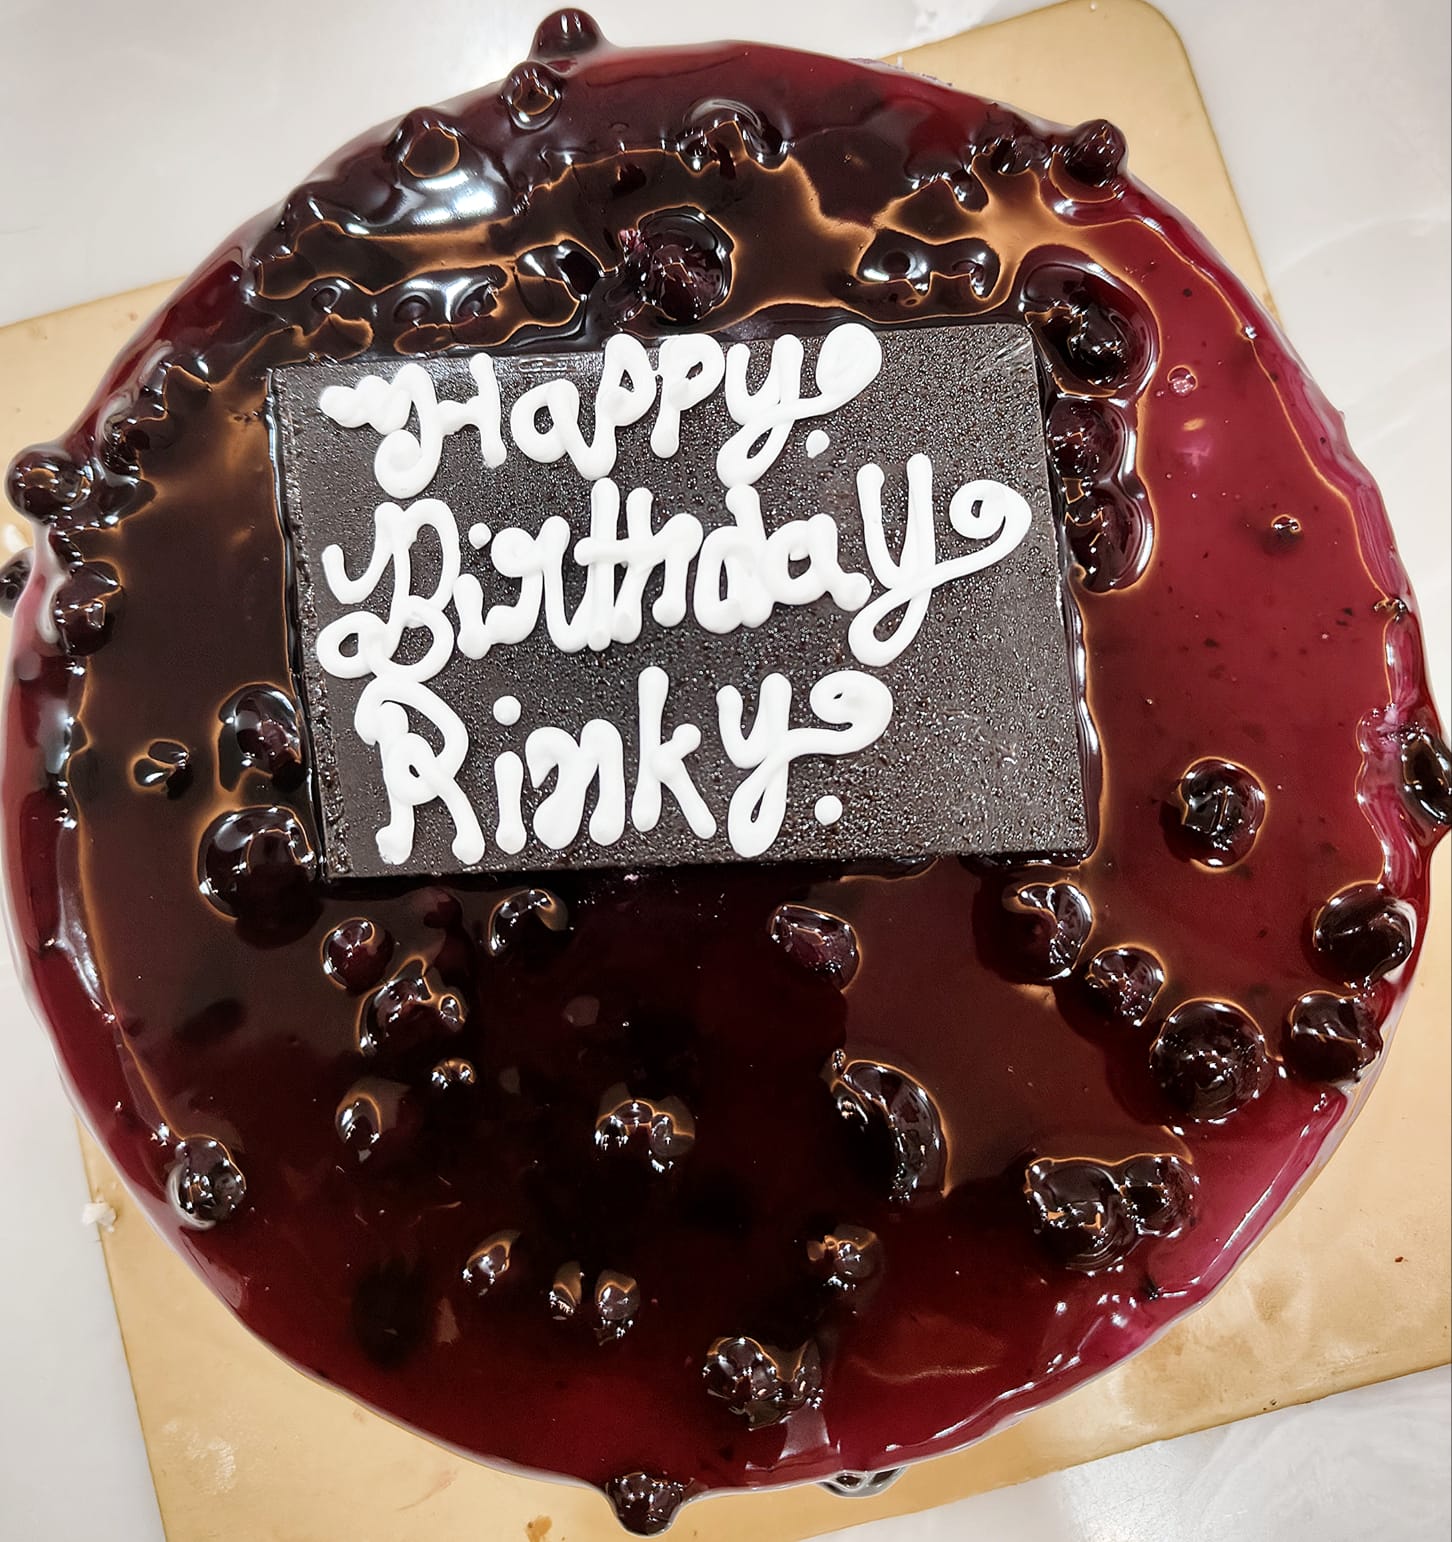 Online black forest cake delivery , 24x7 Home delivery of Cake in BANGALORE  CITY RAILWAY STATION, Banglore